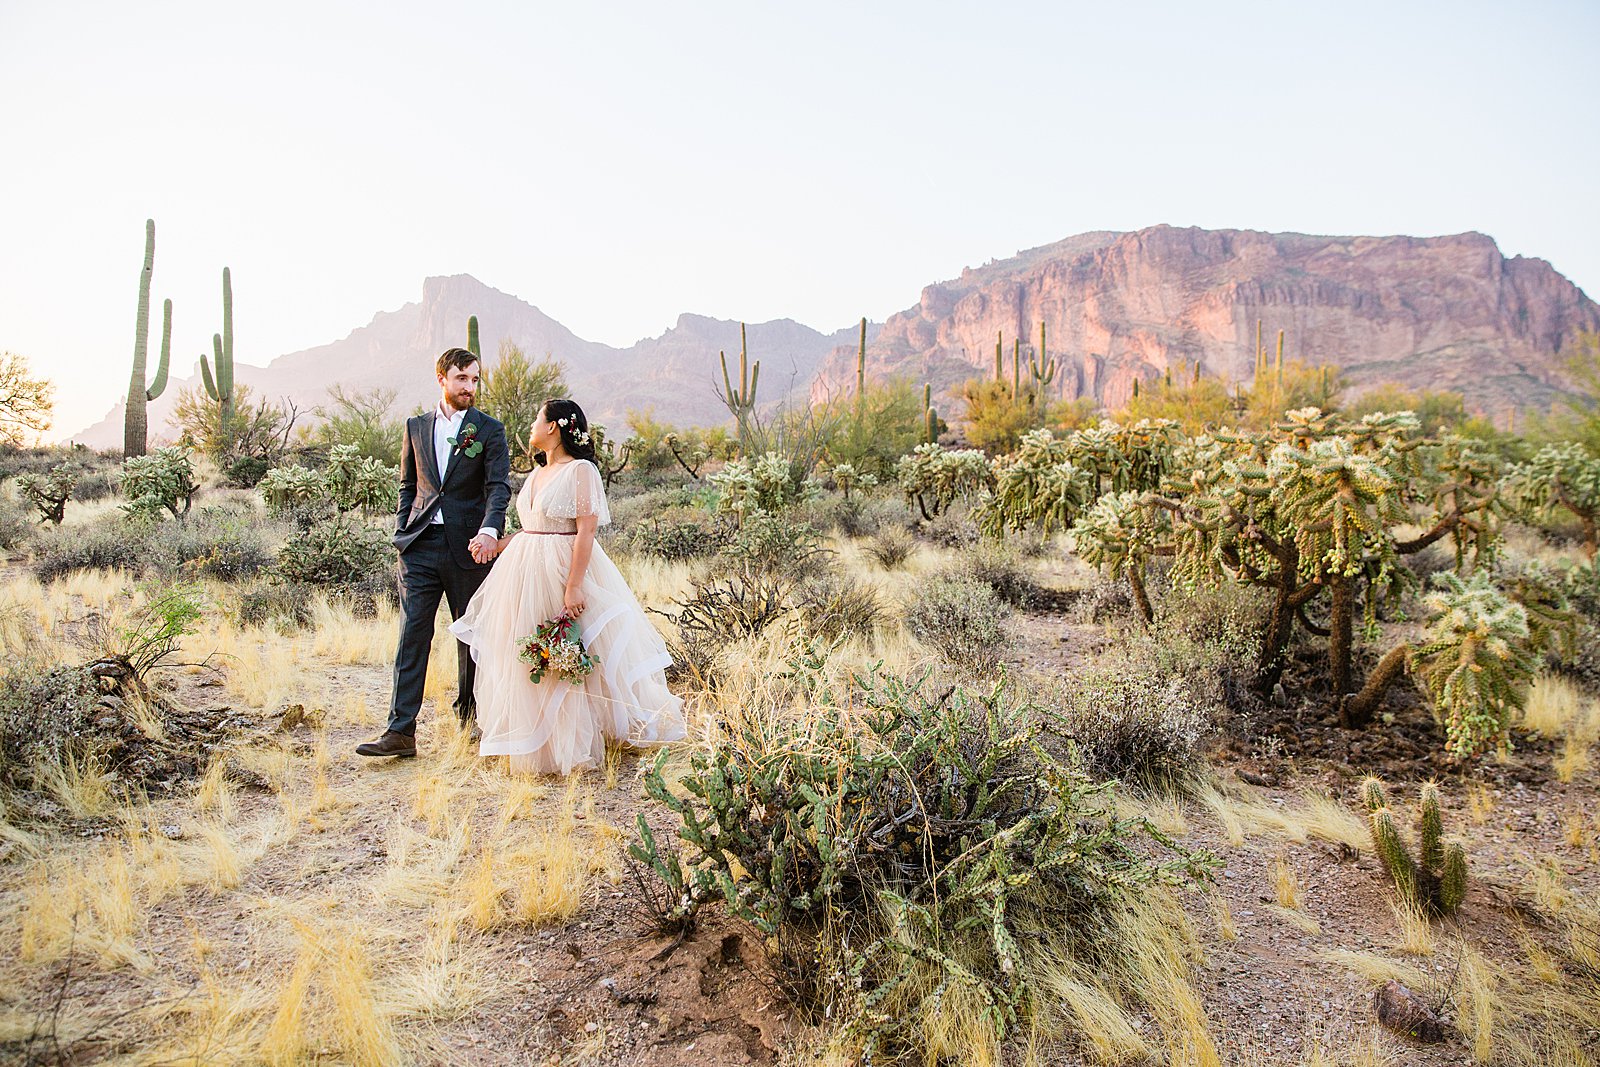 Bride and Groom walking together during their Superstition Mountain Cloth and Flame wedding by Arizona wedding photographer PMA Photography.